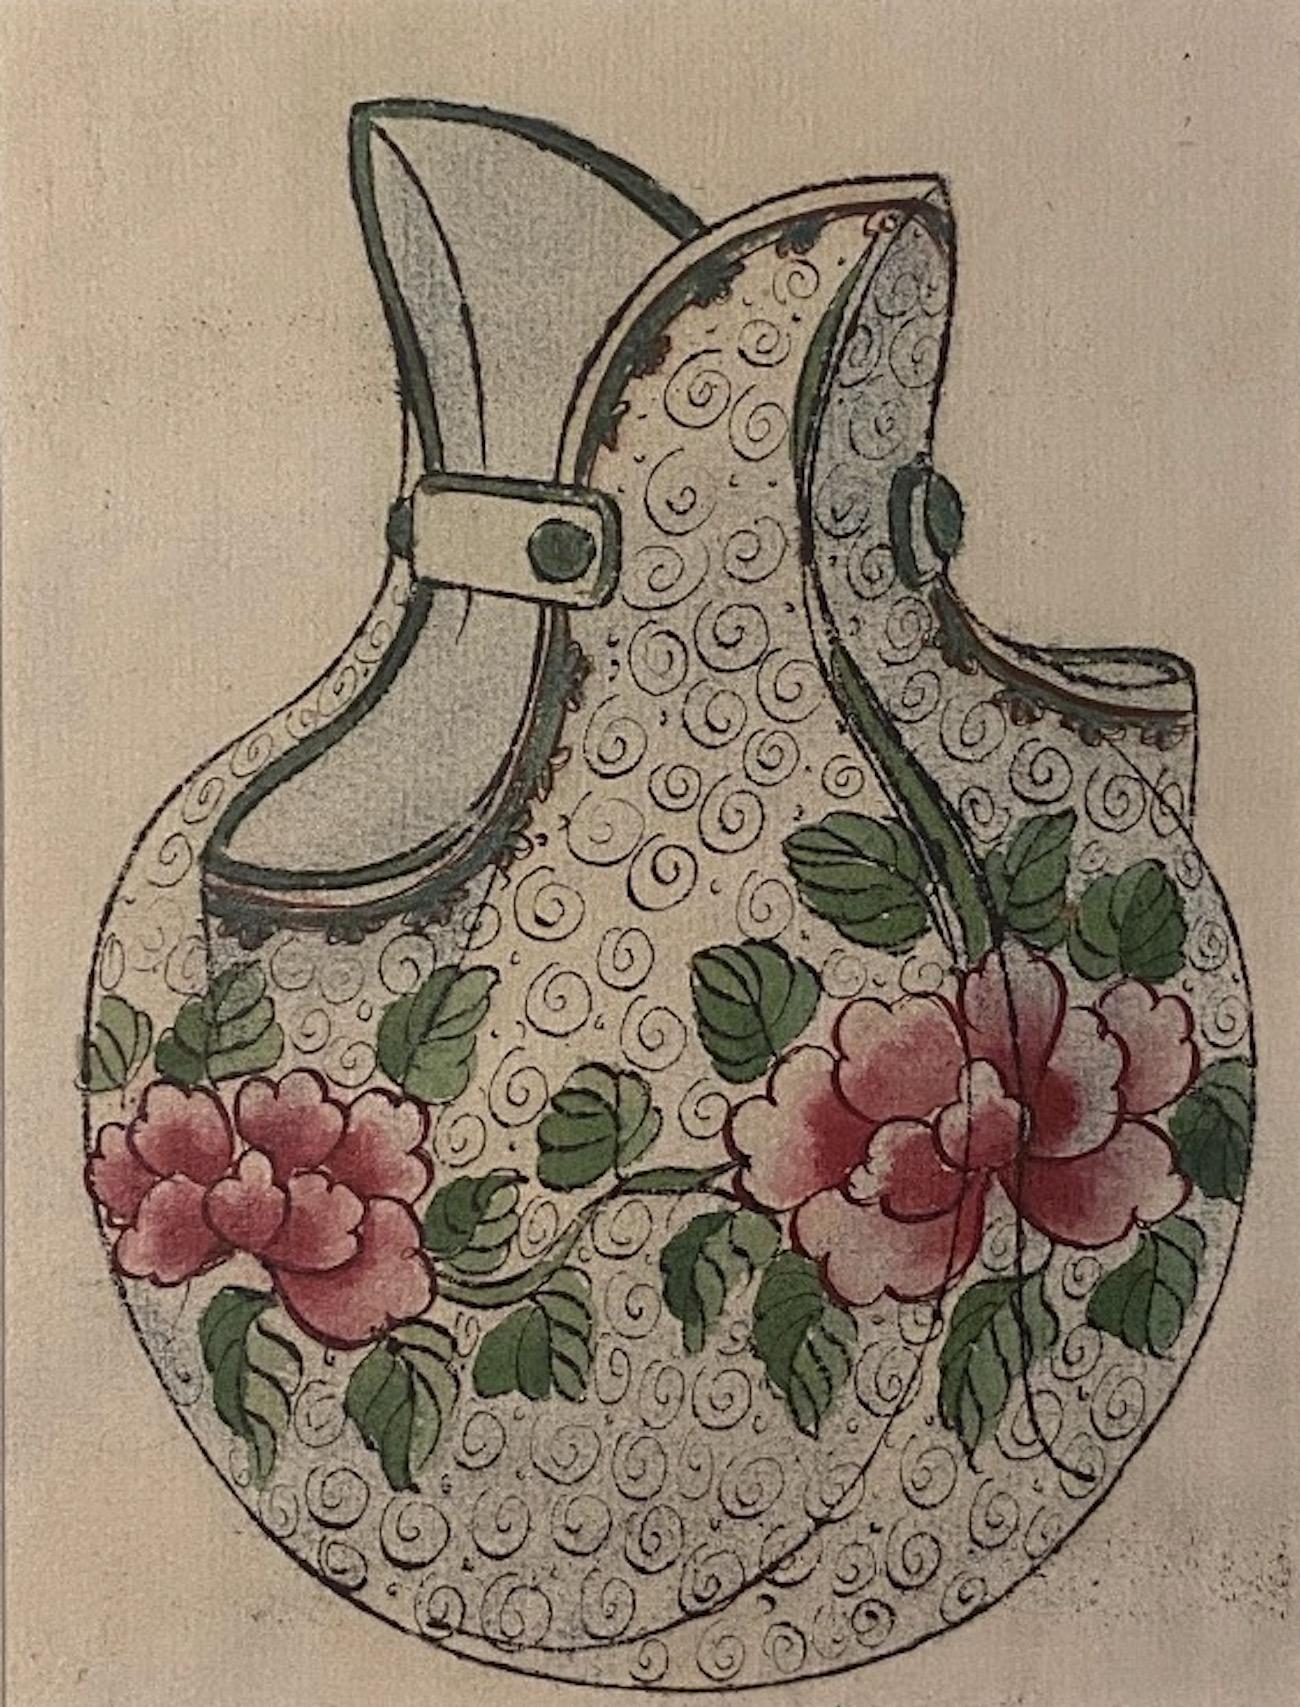 Unknown Figurative Art - Porcelain Vase -  China Ink and Watercolor - 1890s